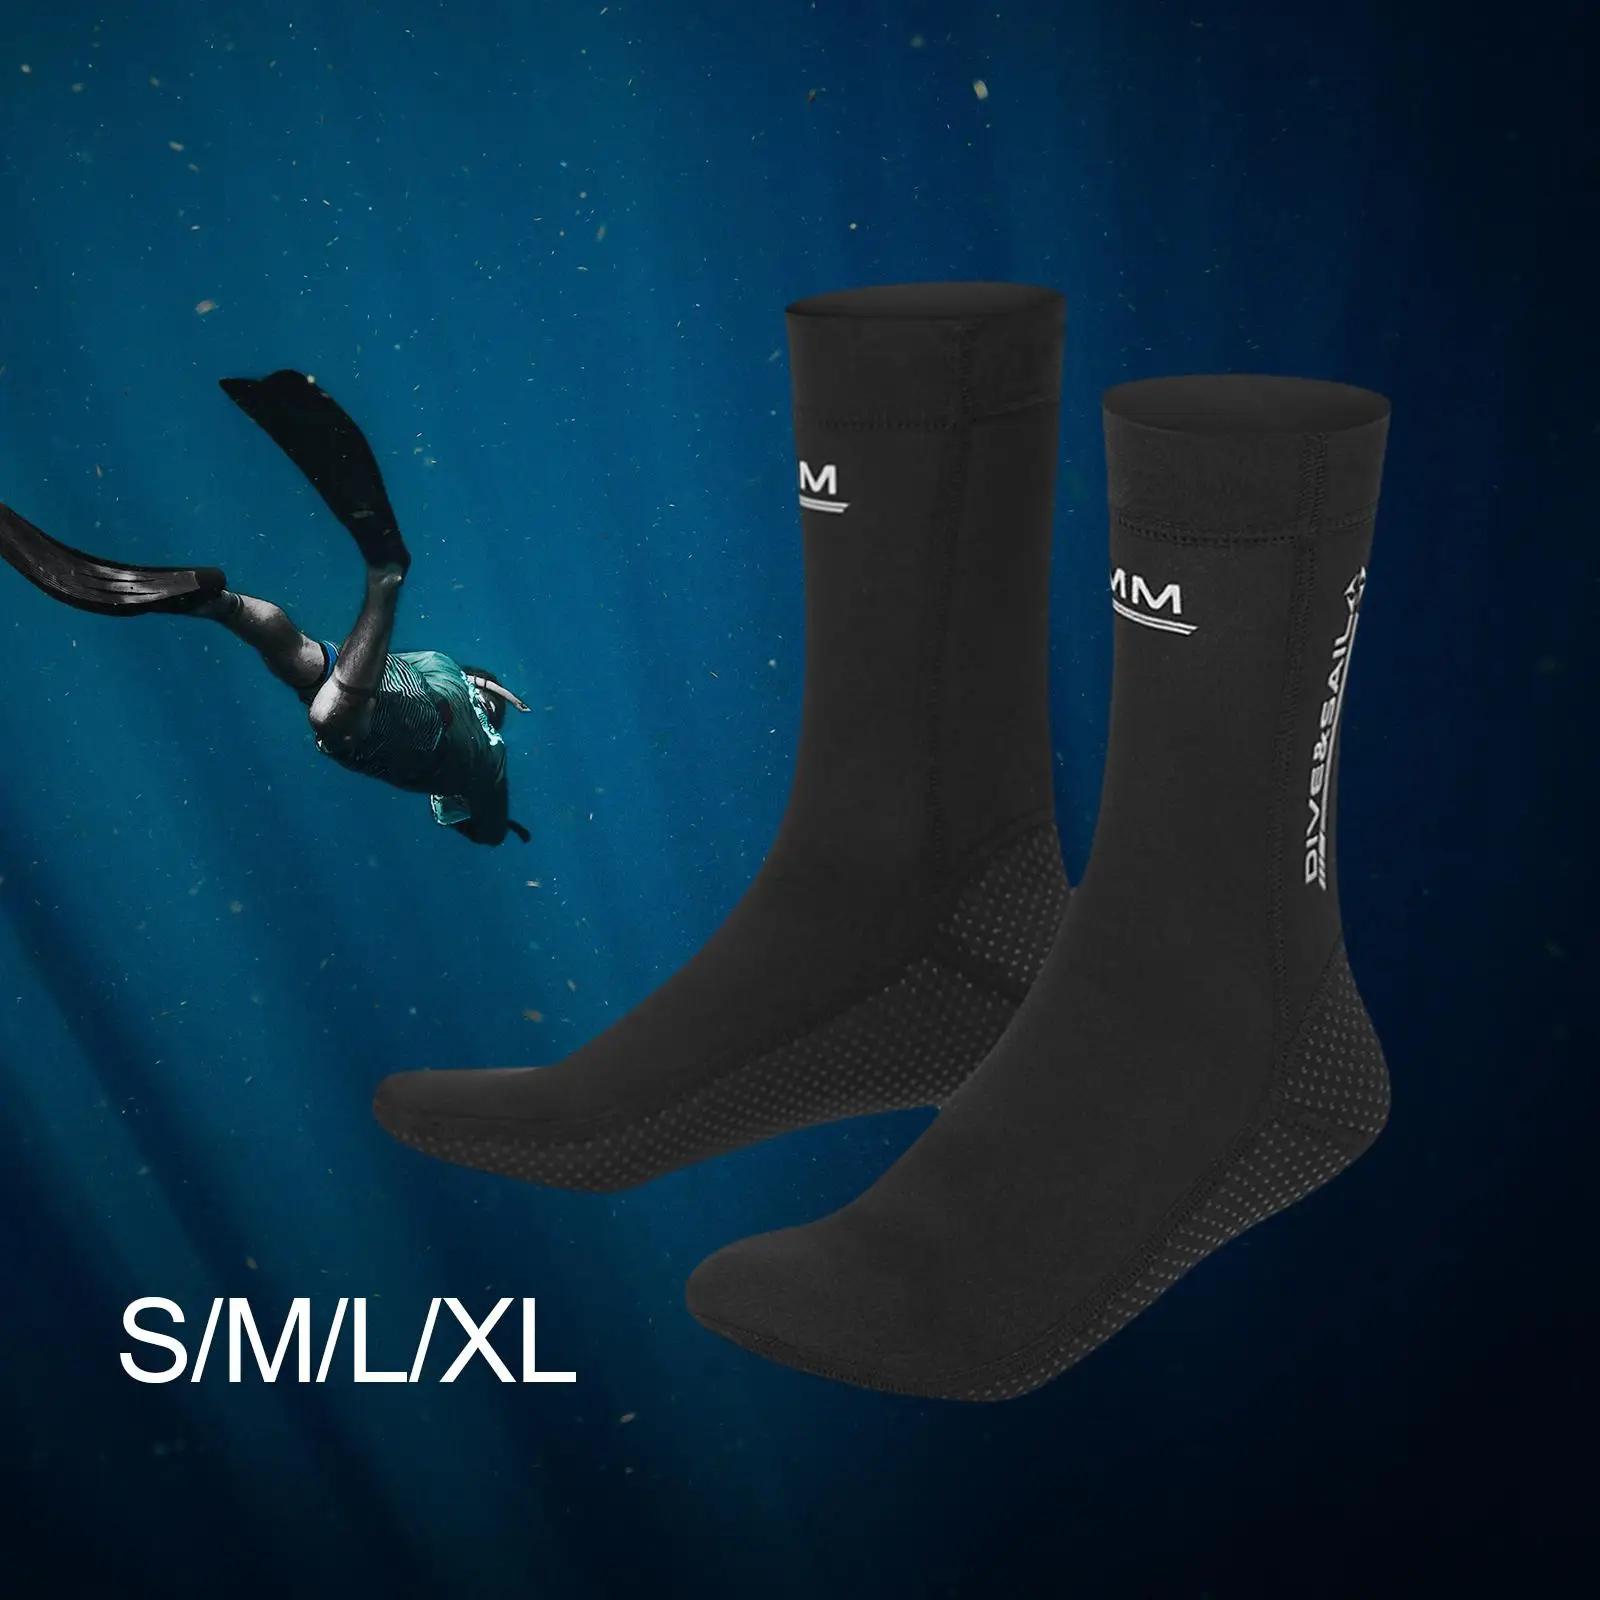 Diving Socks Water Socks Sand Proof Wetsuit Water Resistant Non Slip Beach Boots for Swimming Outdoor Activities Unisex Adult